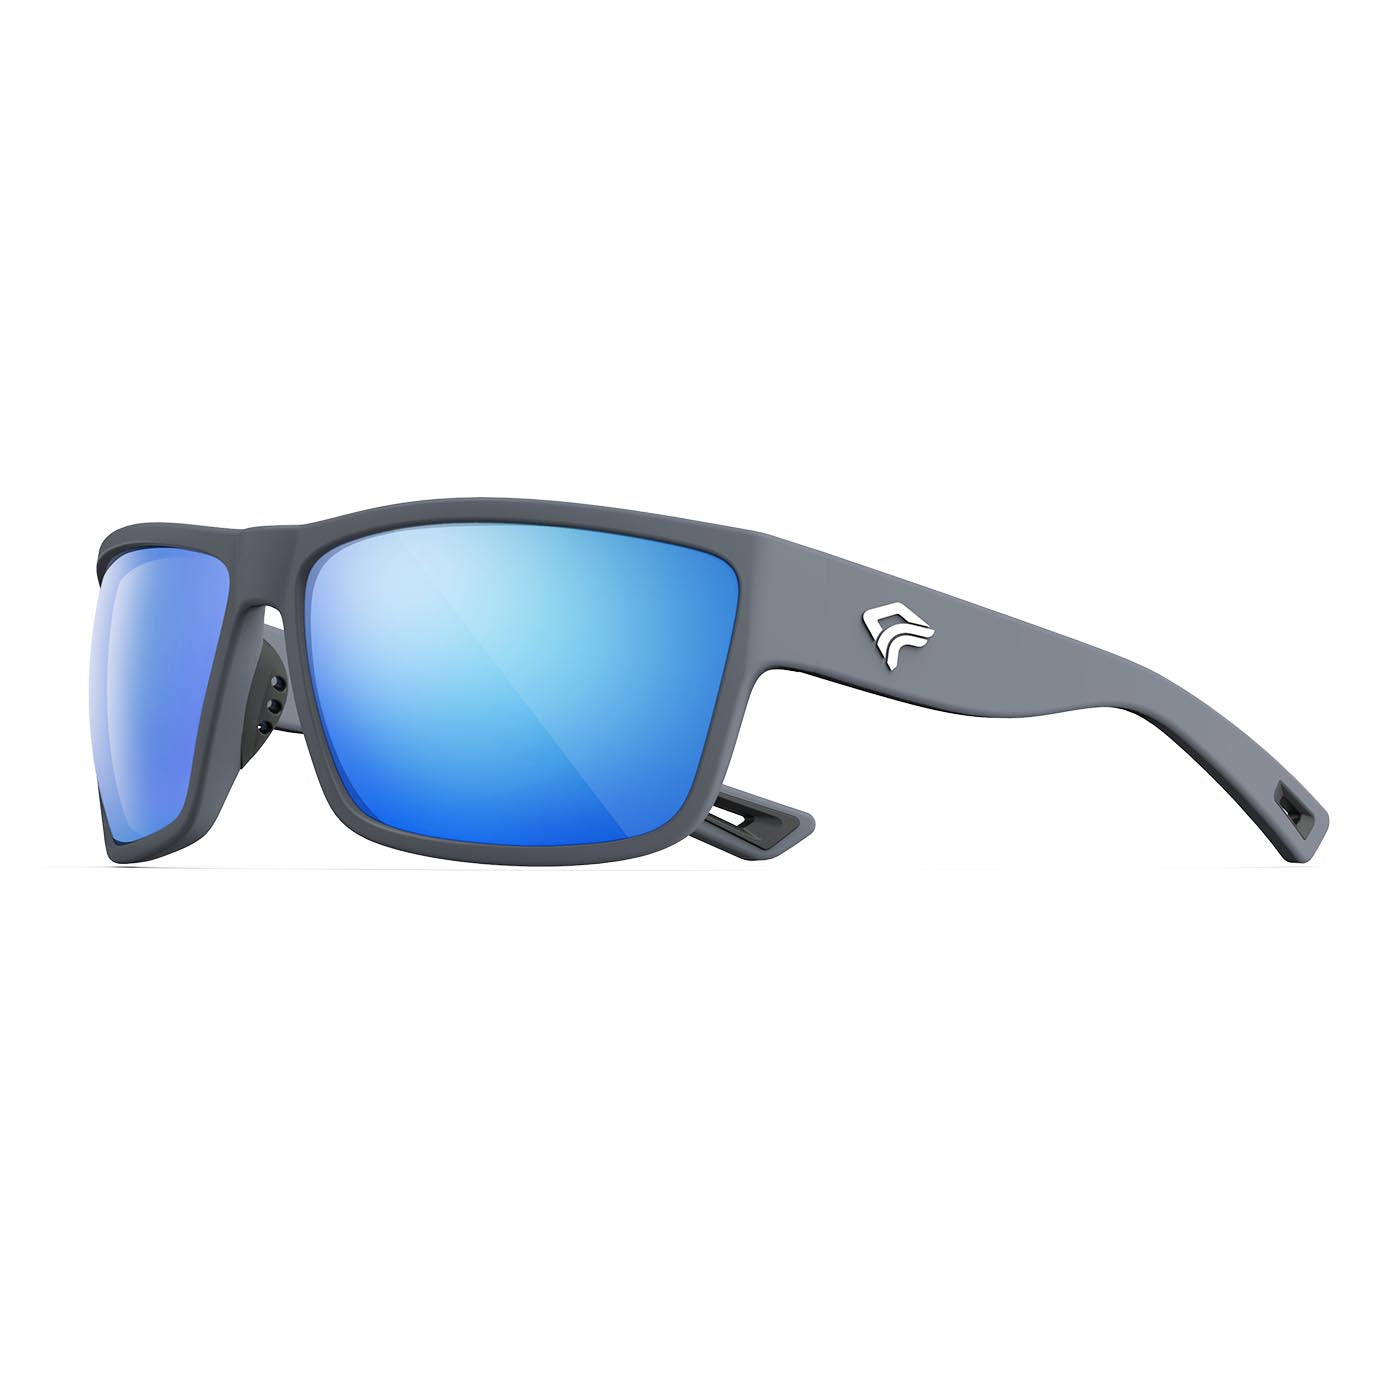 Pure Polarized Sports Sunglasses and Cycling, Men Women Frame - - Warranty Ideal - and Adjustable Half Golf, Transparent Flexible for for To Fishing and Ideal Matte with Lifetime - Running, Grey